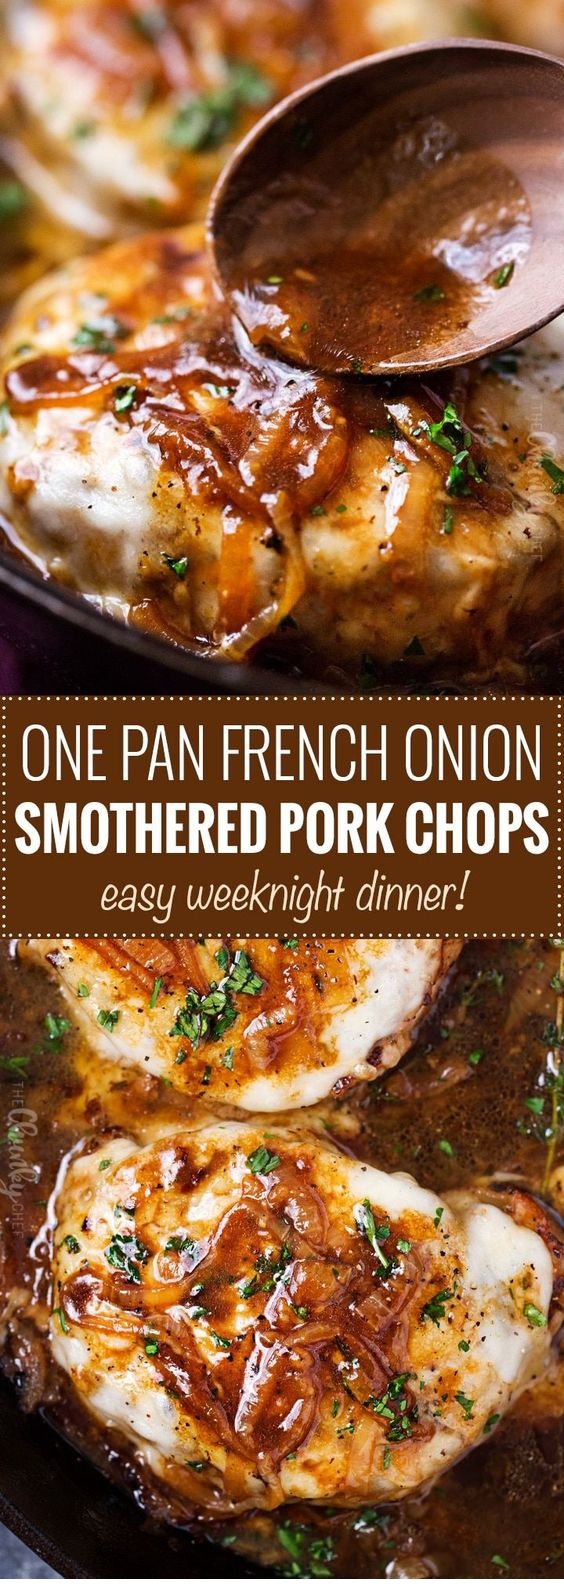 One Pan French Onion Smothered Pork Chops